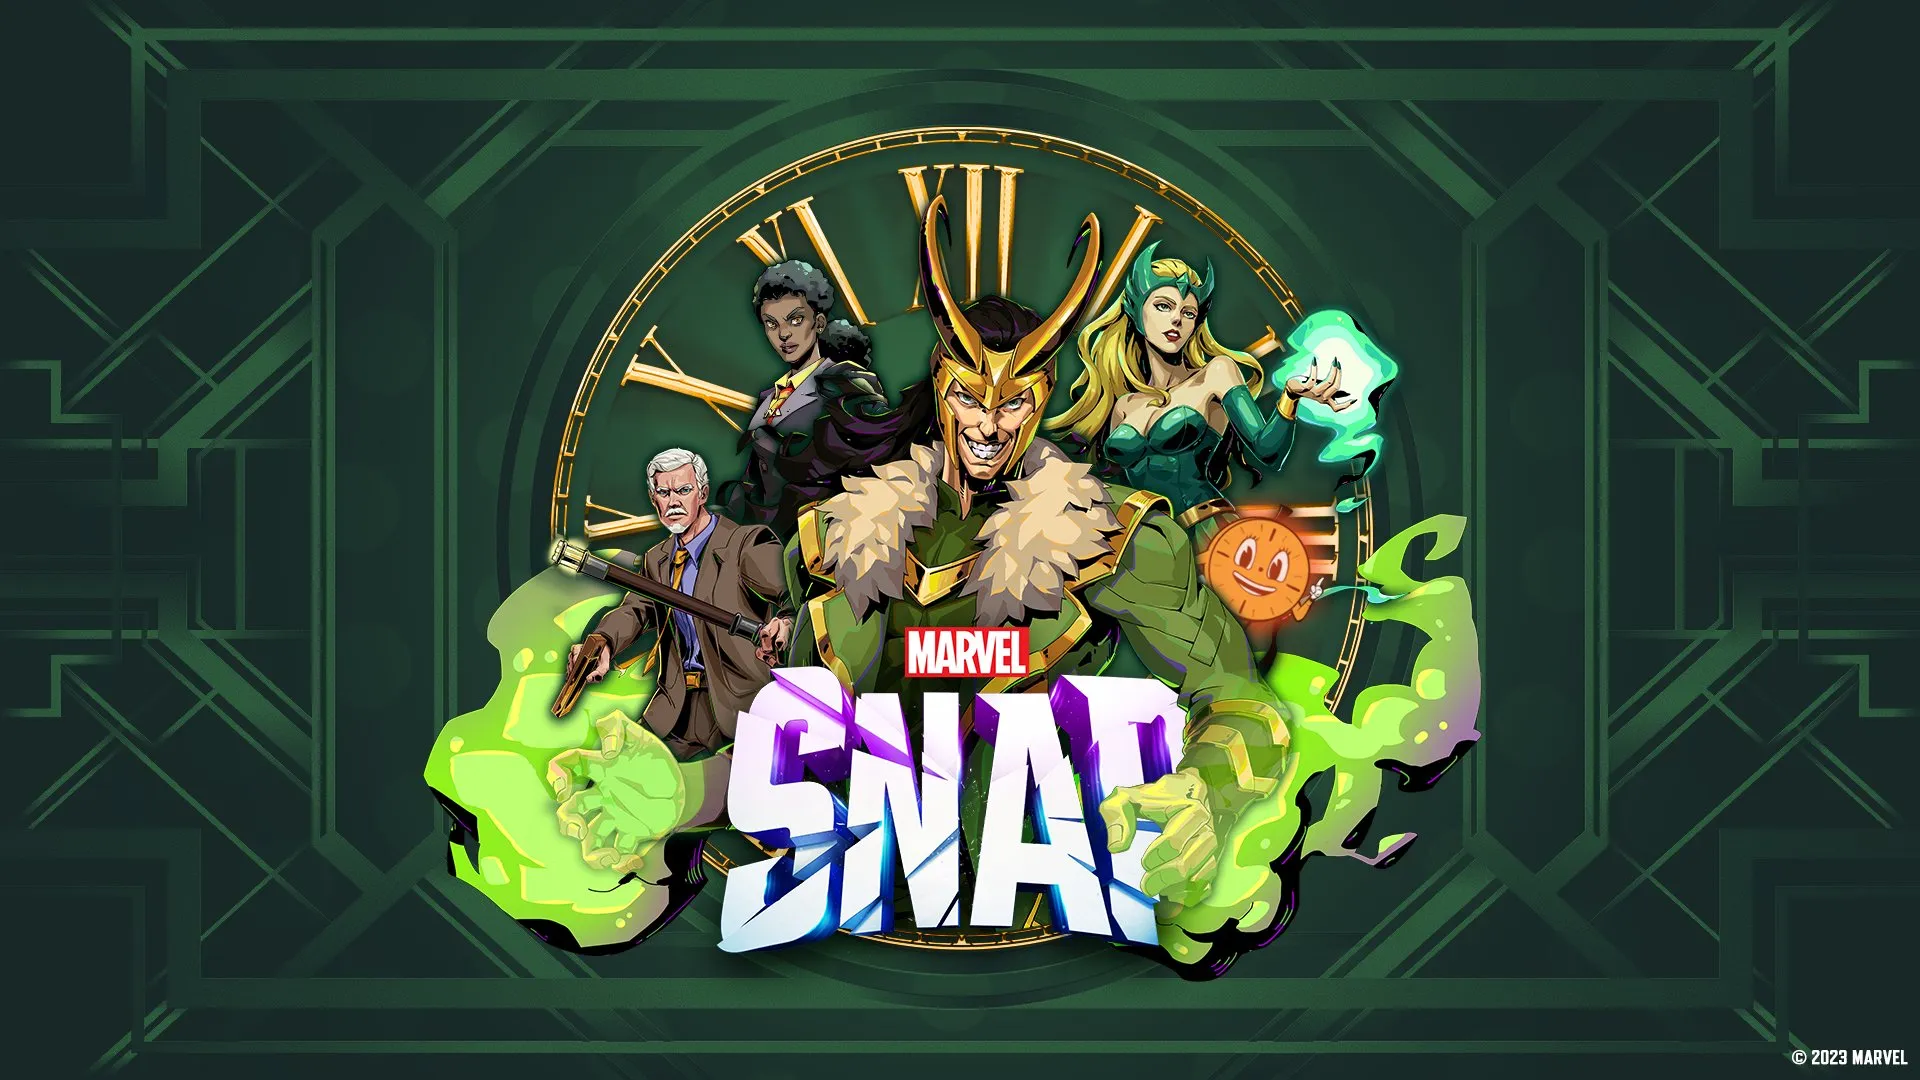 Loki is officially being added to Marvel Snap - confirmed to be coming  soon